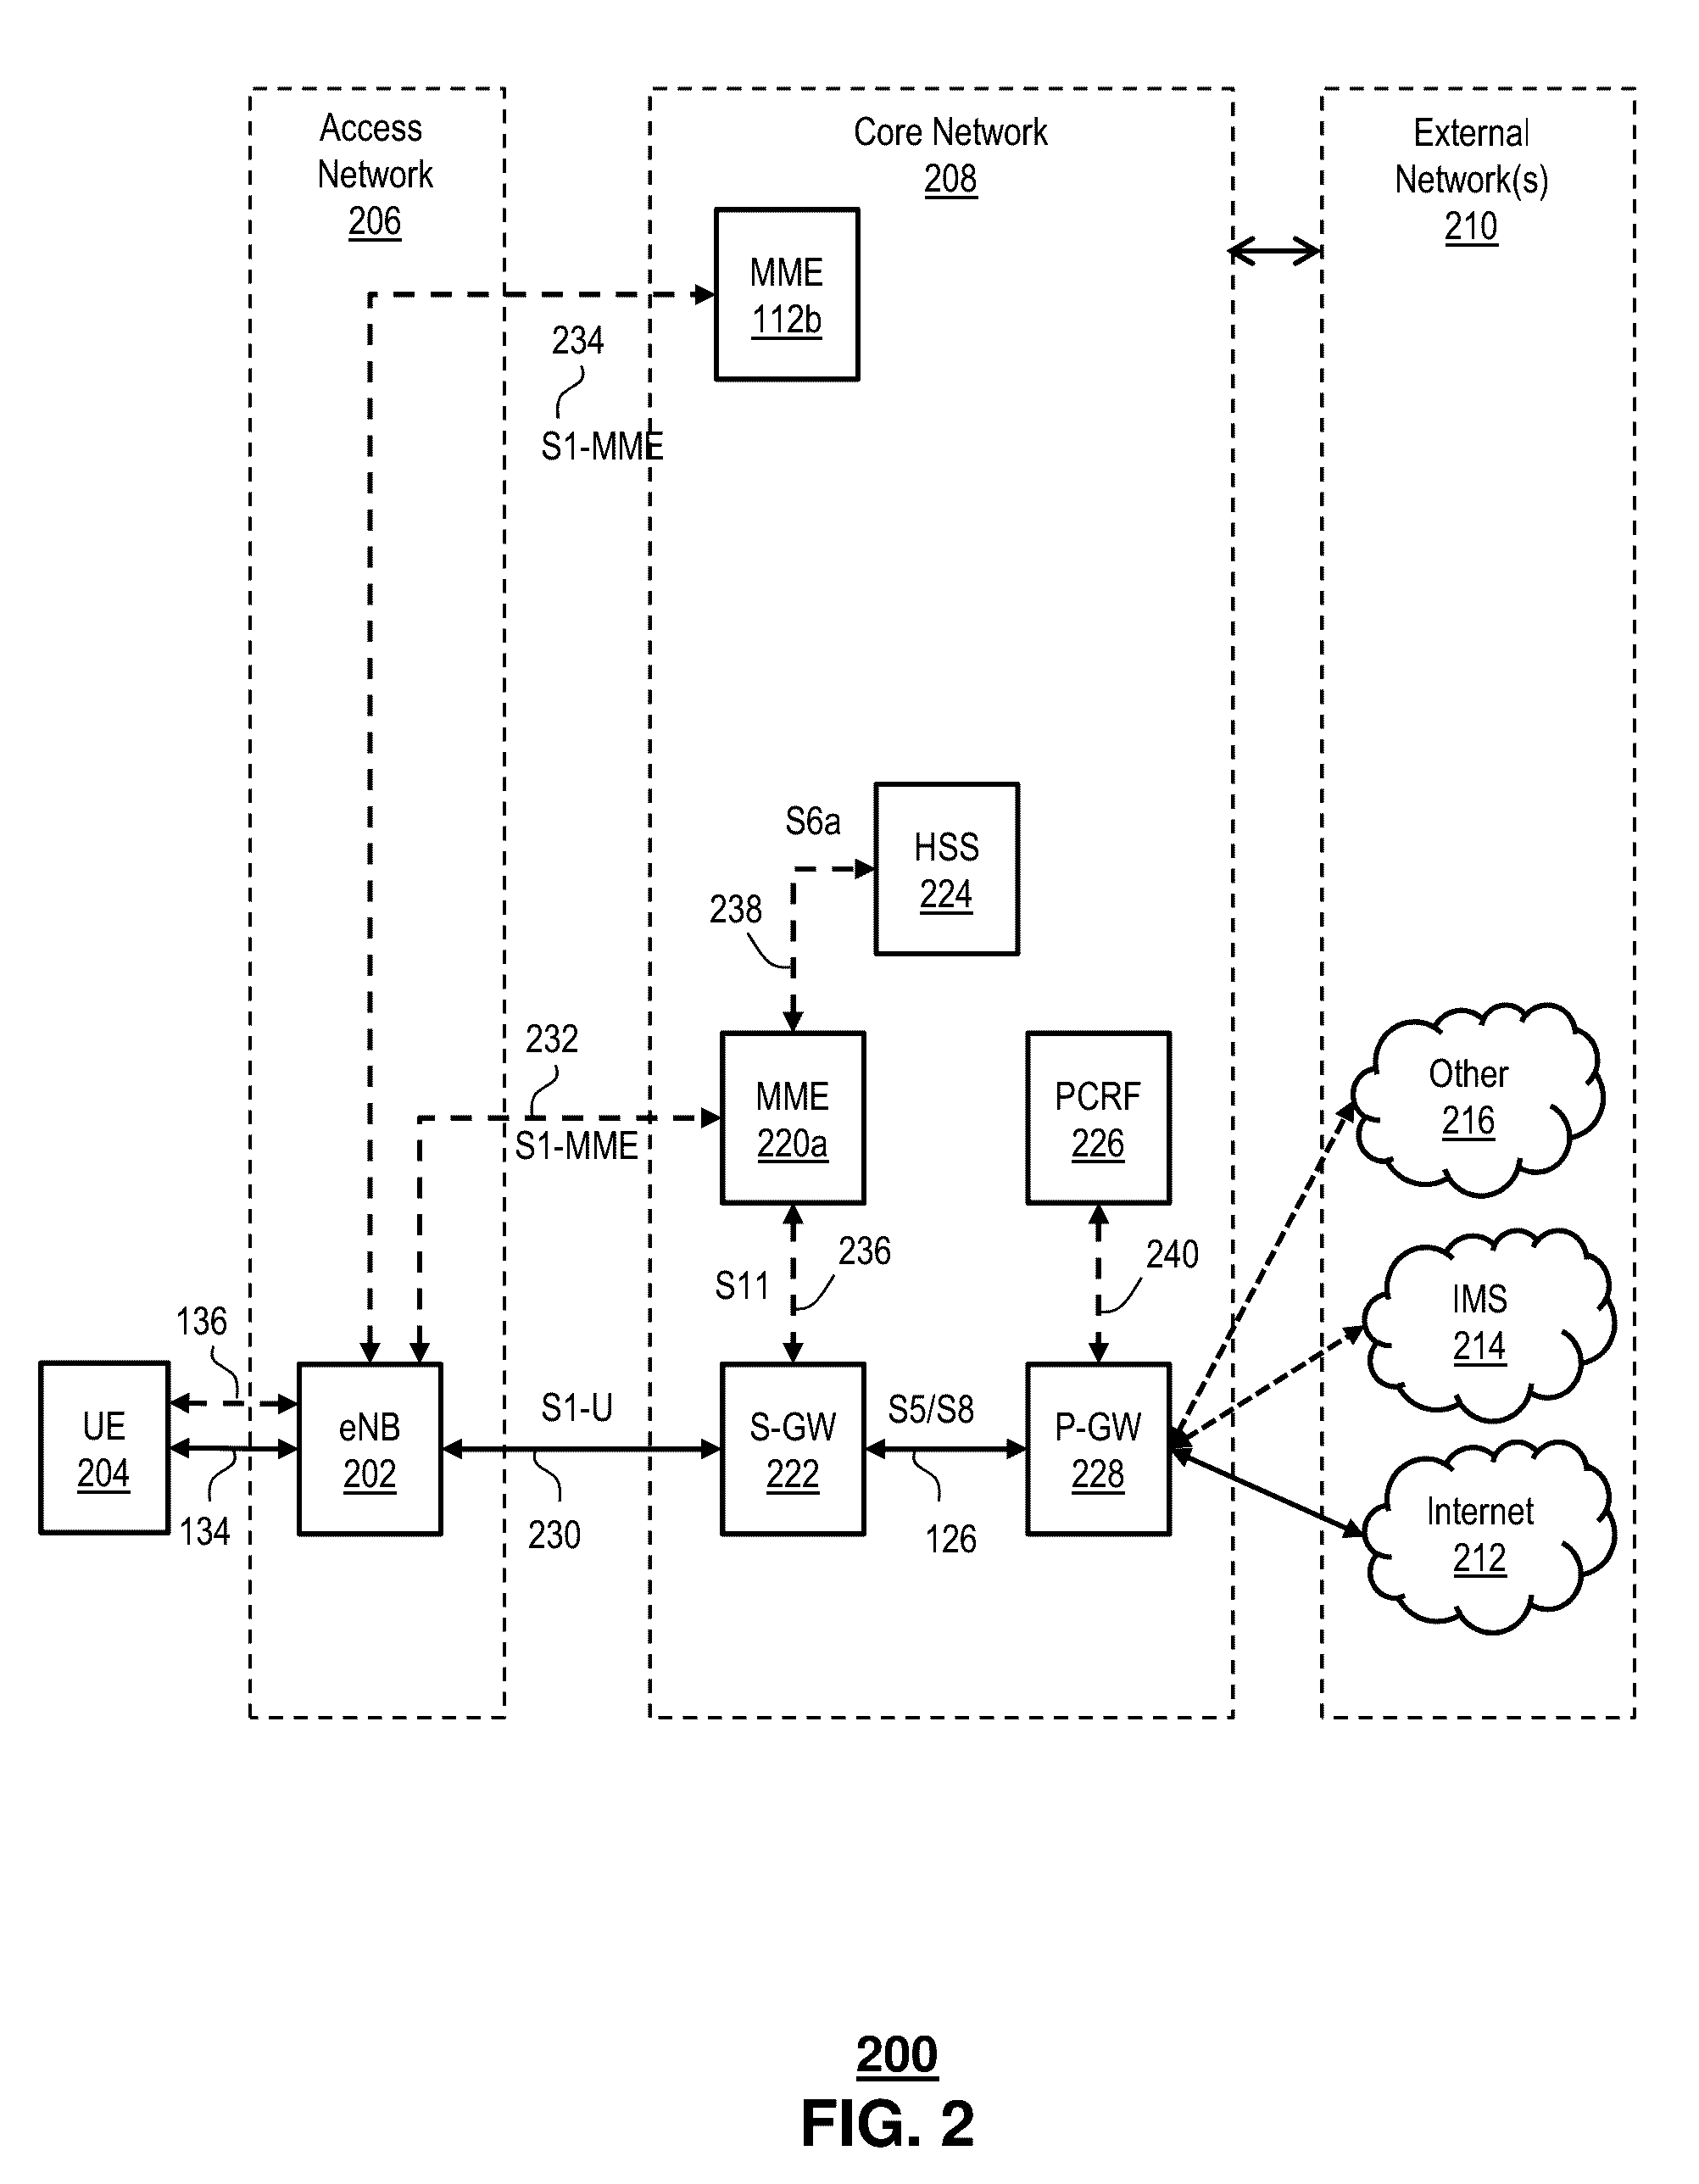 Proximity based sub-pooling of network devices in mobile wireless networks